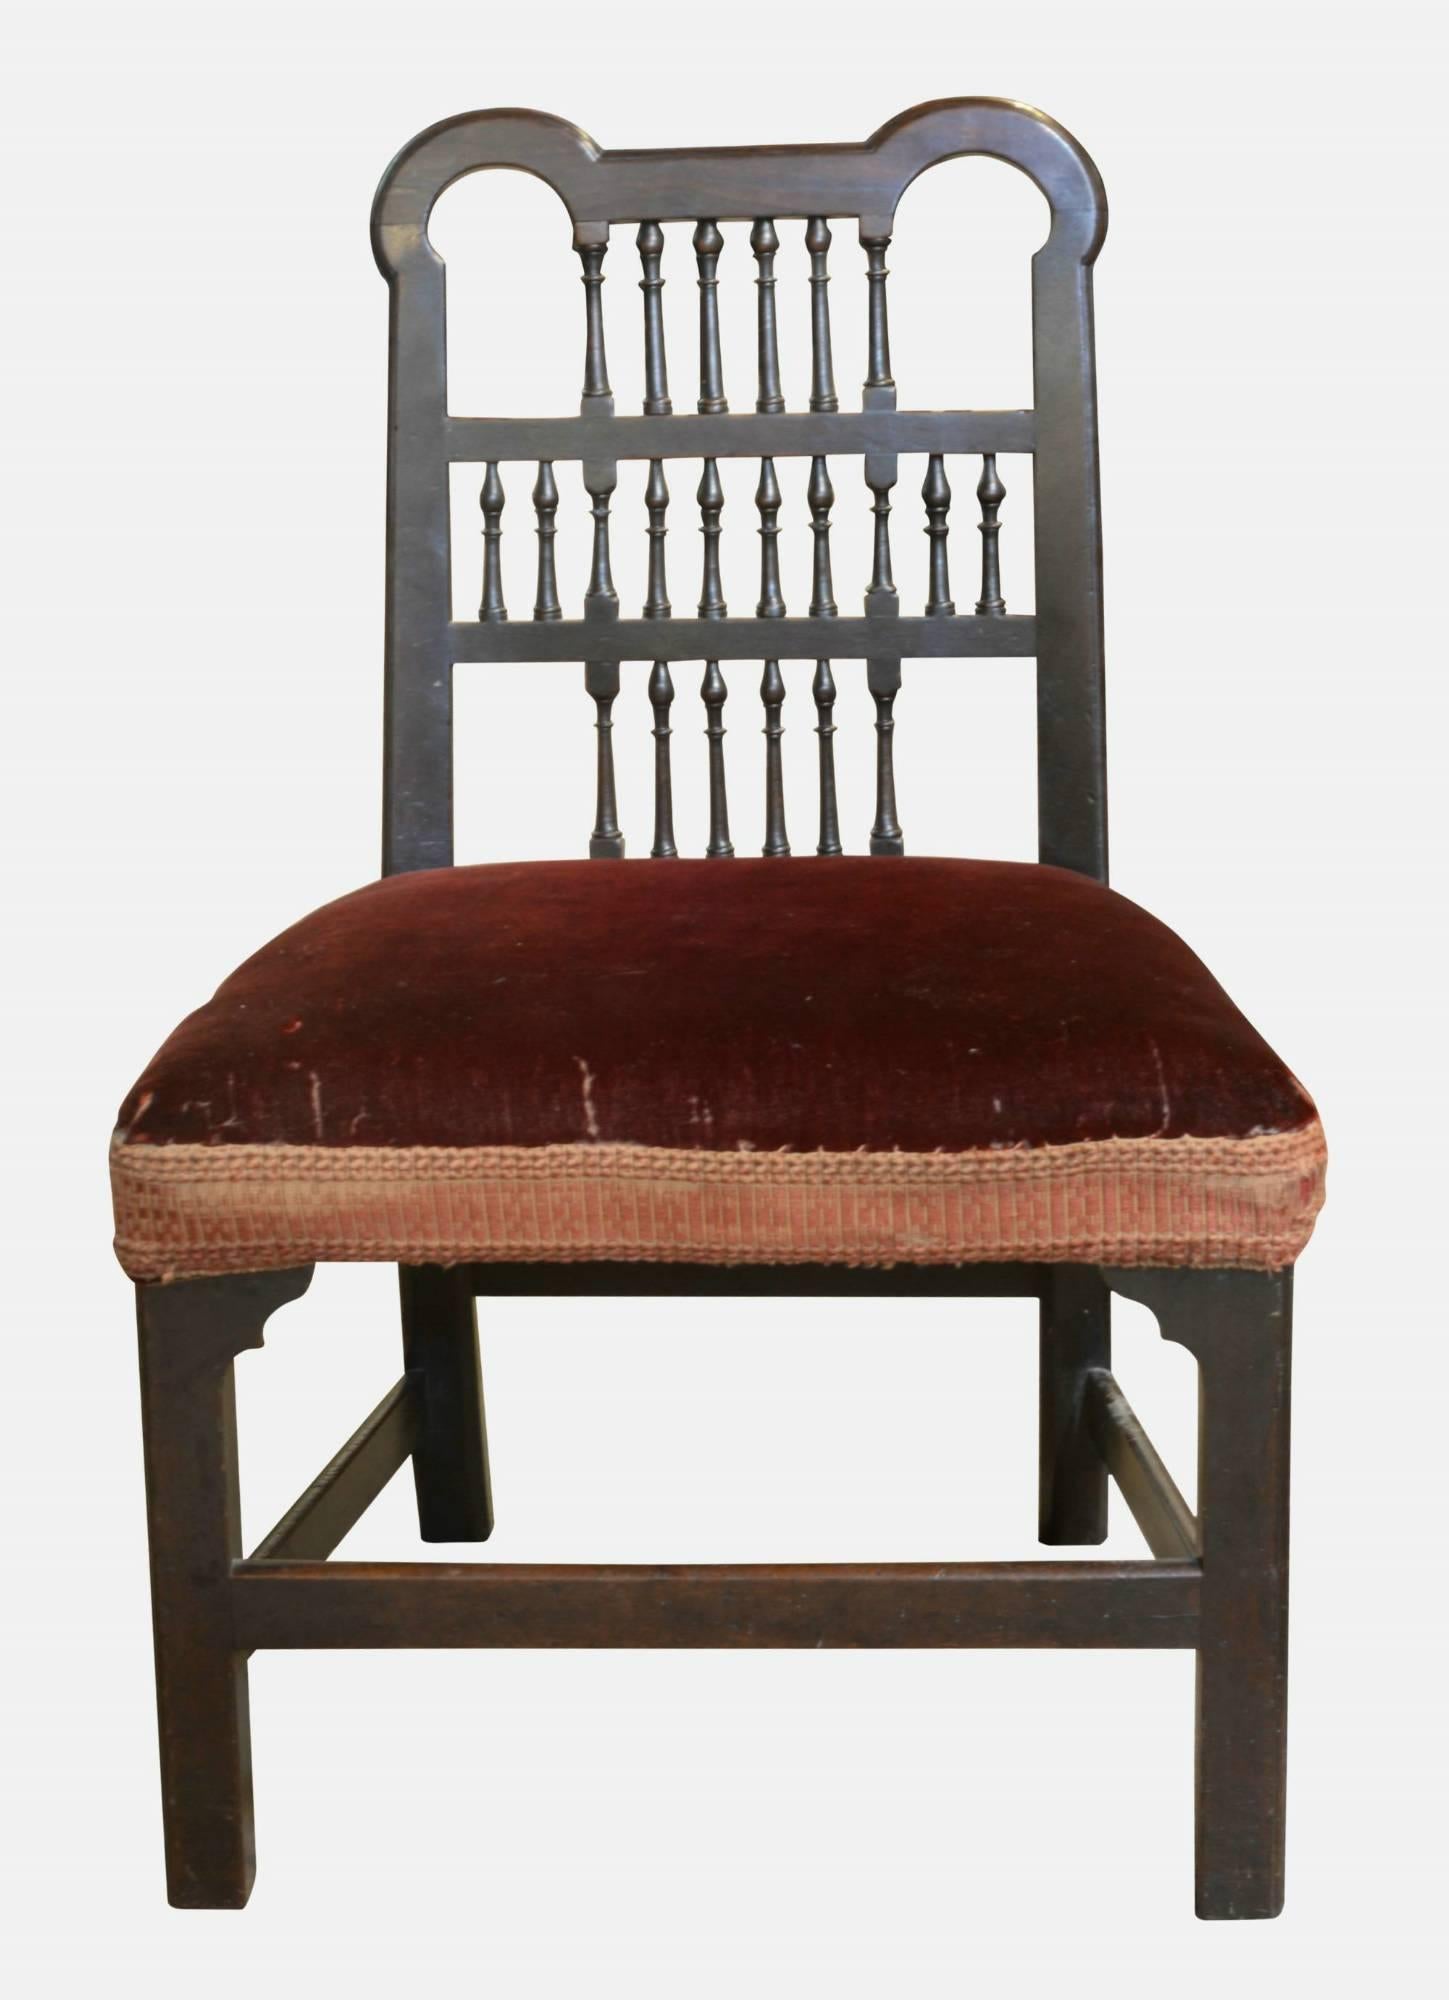 A charming Chippendale period spindle back chair. Cuban mahogany, low back, nursing chair in original, untouched condition.
  